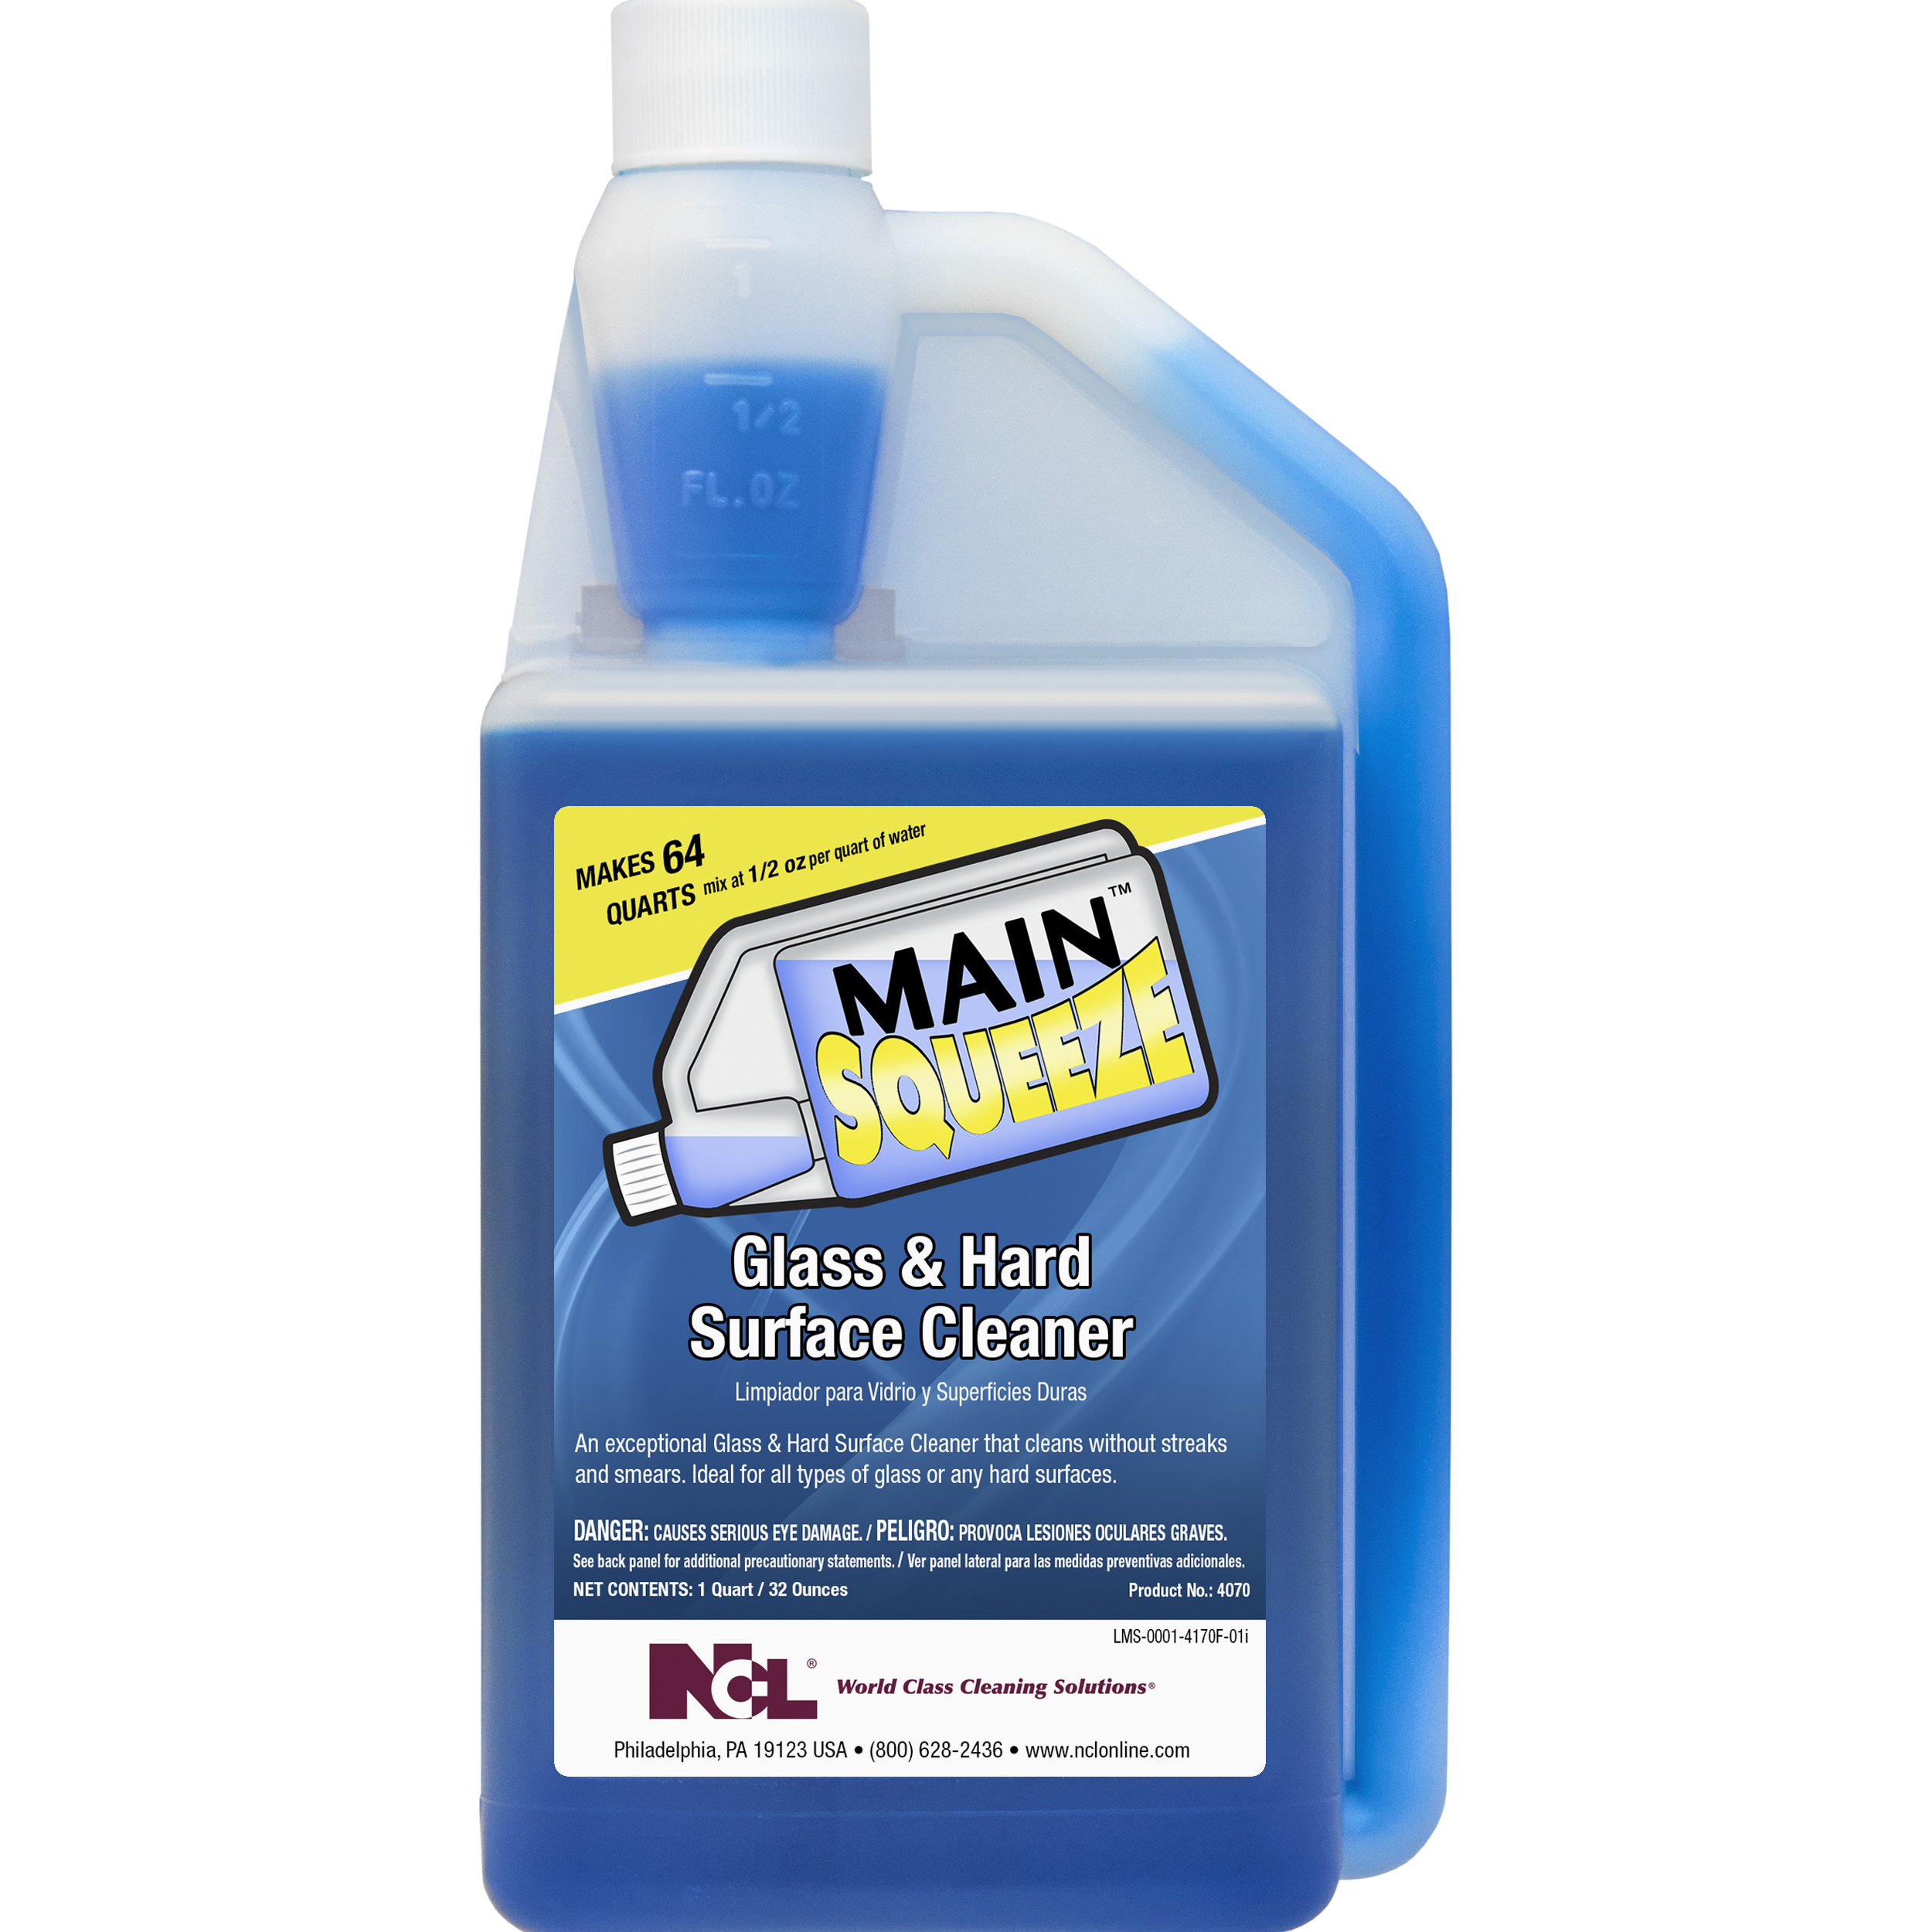  MAIN SQUEEZE Glass & Hard Surface Cleaner. 6/32 oz (1 Qt.) Case (NCL4170-49) 